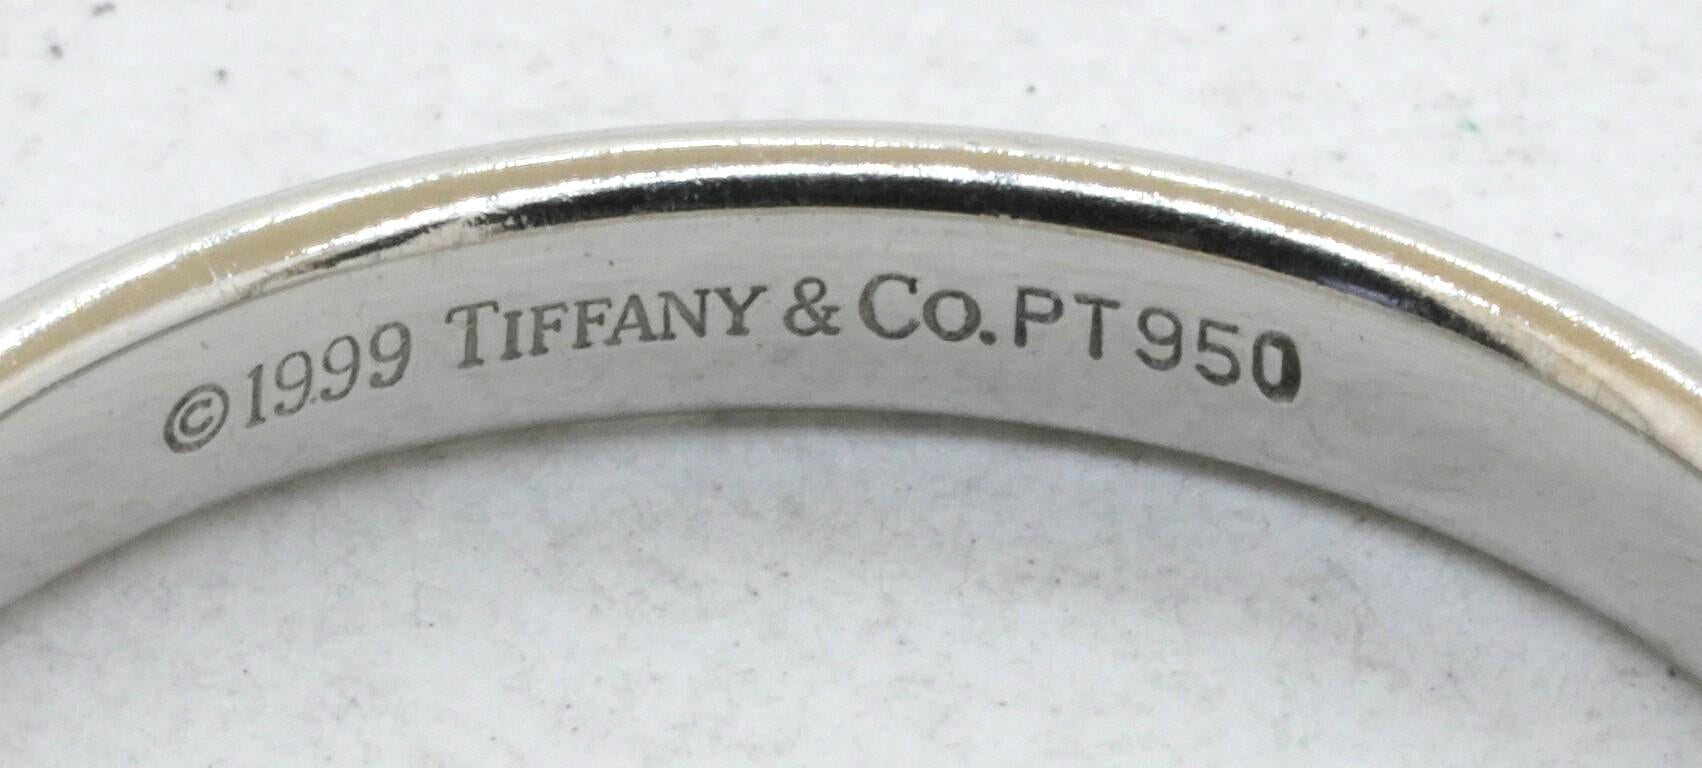 Tiffany & Co. Platinum high fashion 3mm wide band ring size 10. This fashionable piece of jewelry is crafted in gorgeous Platinum & features an elegant looking 3mm wide band ring design. Anyone will enjoy this amazing ring. Highly attractive style